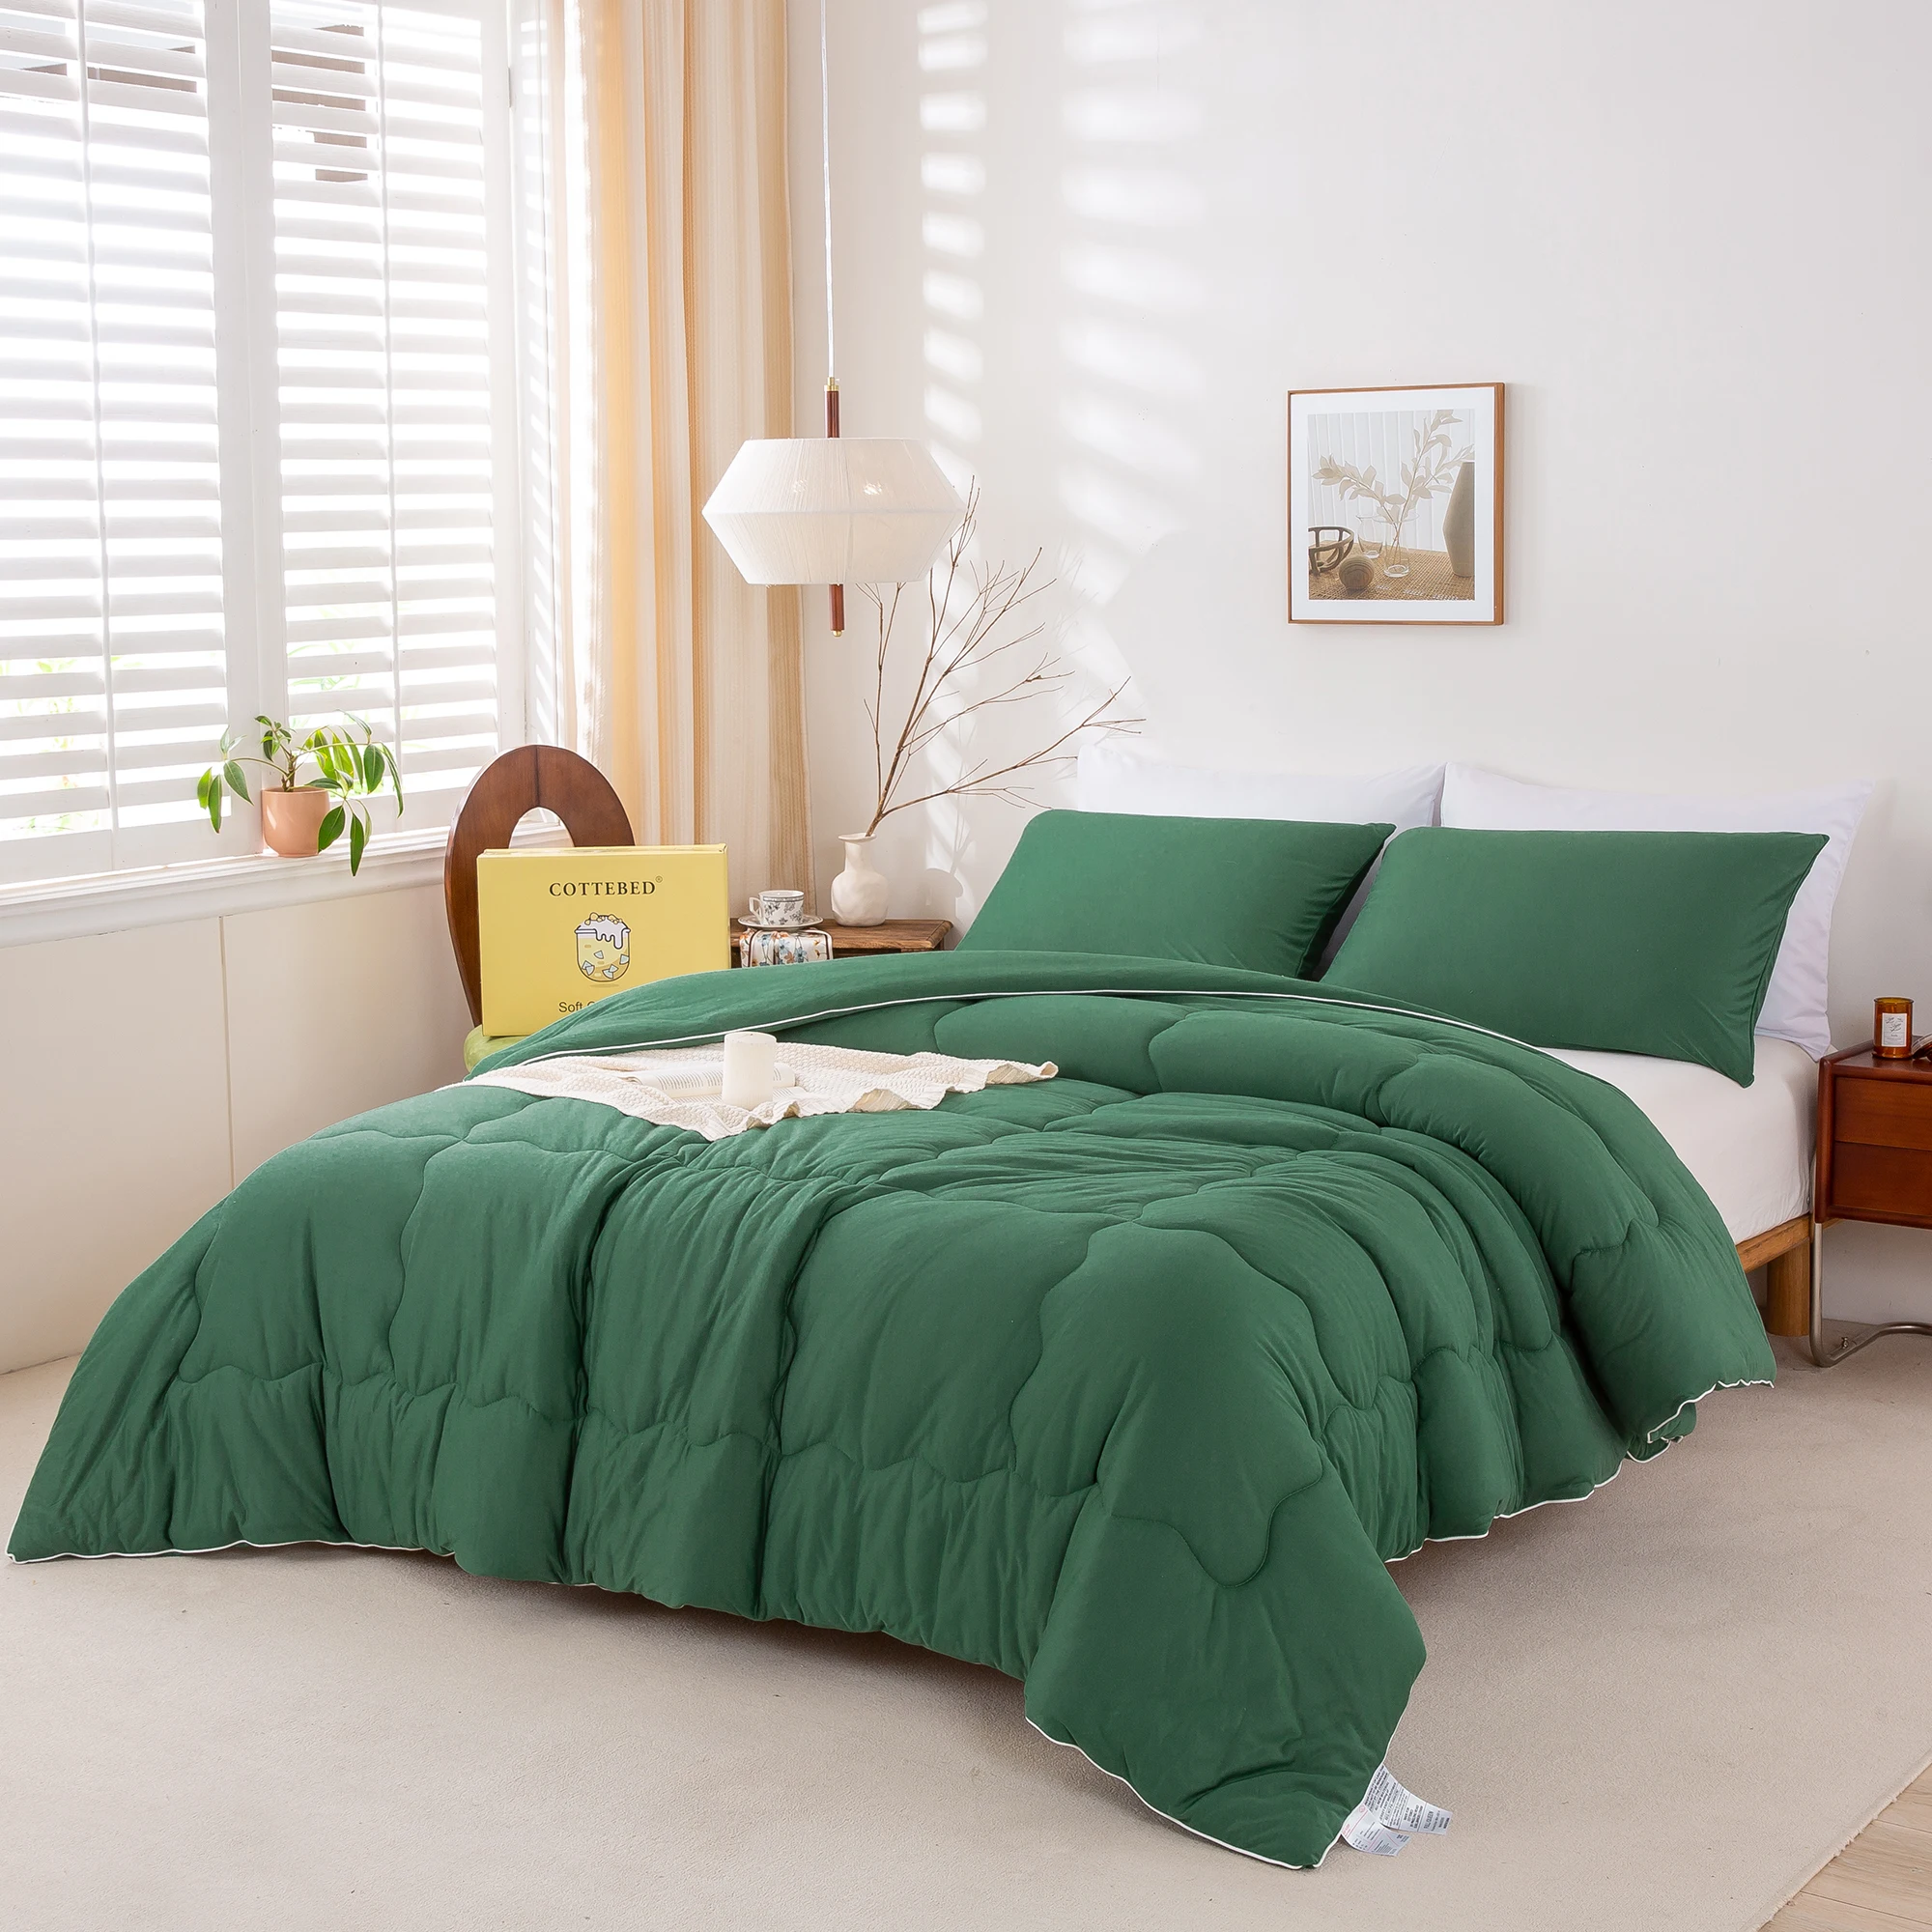 

Emerald Forest Green Jersey Knit Cotton comfort bedding sets,The 68inch*92 inch/172*234cm,fitted for your Twin/Twin XL Size Bed.